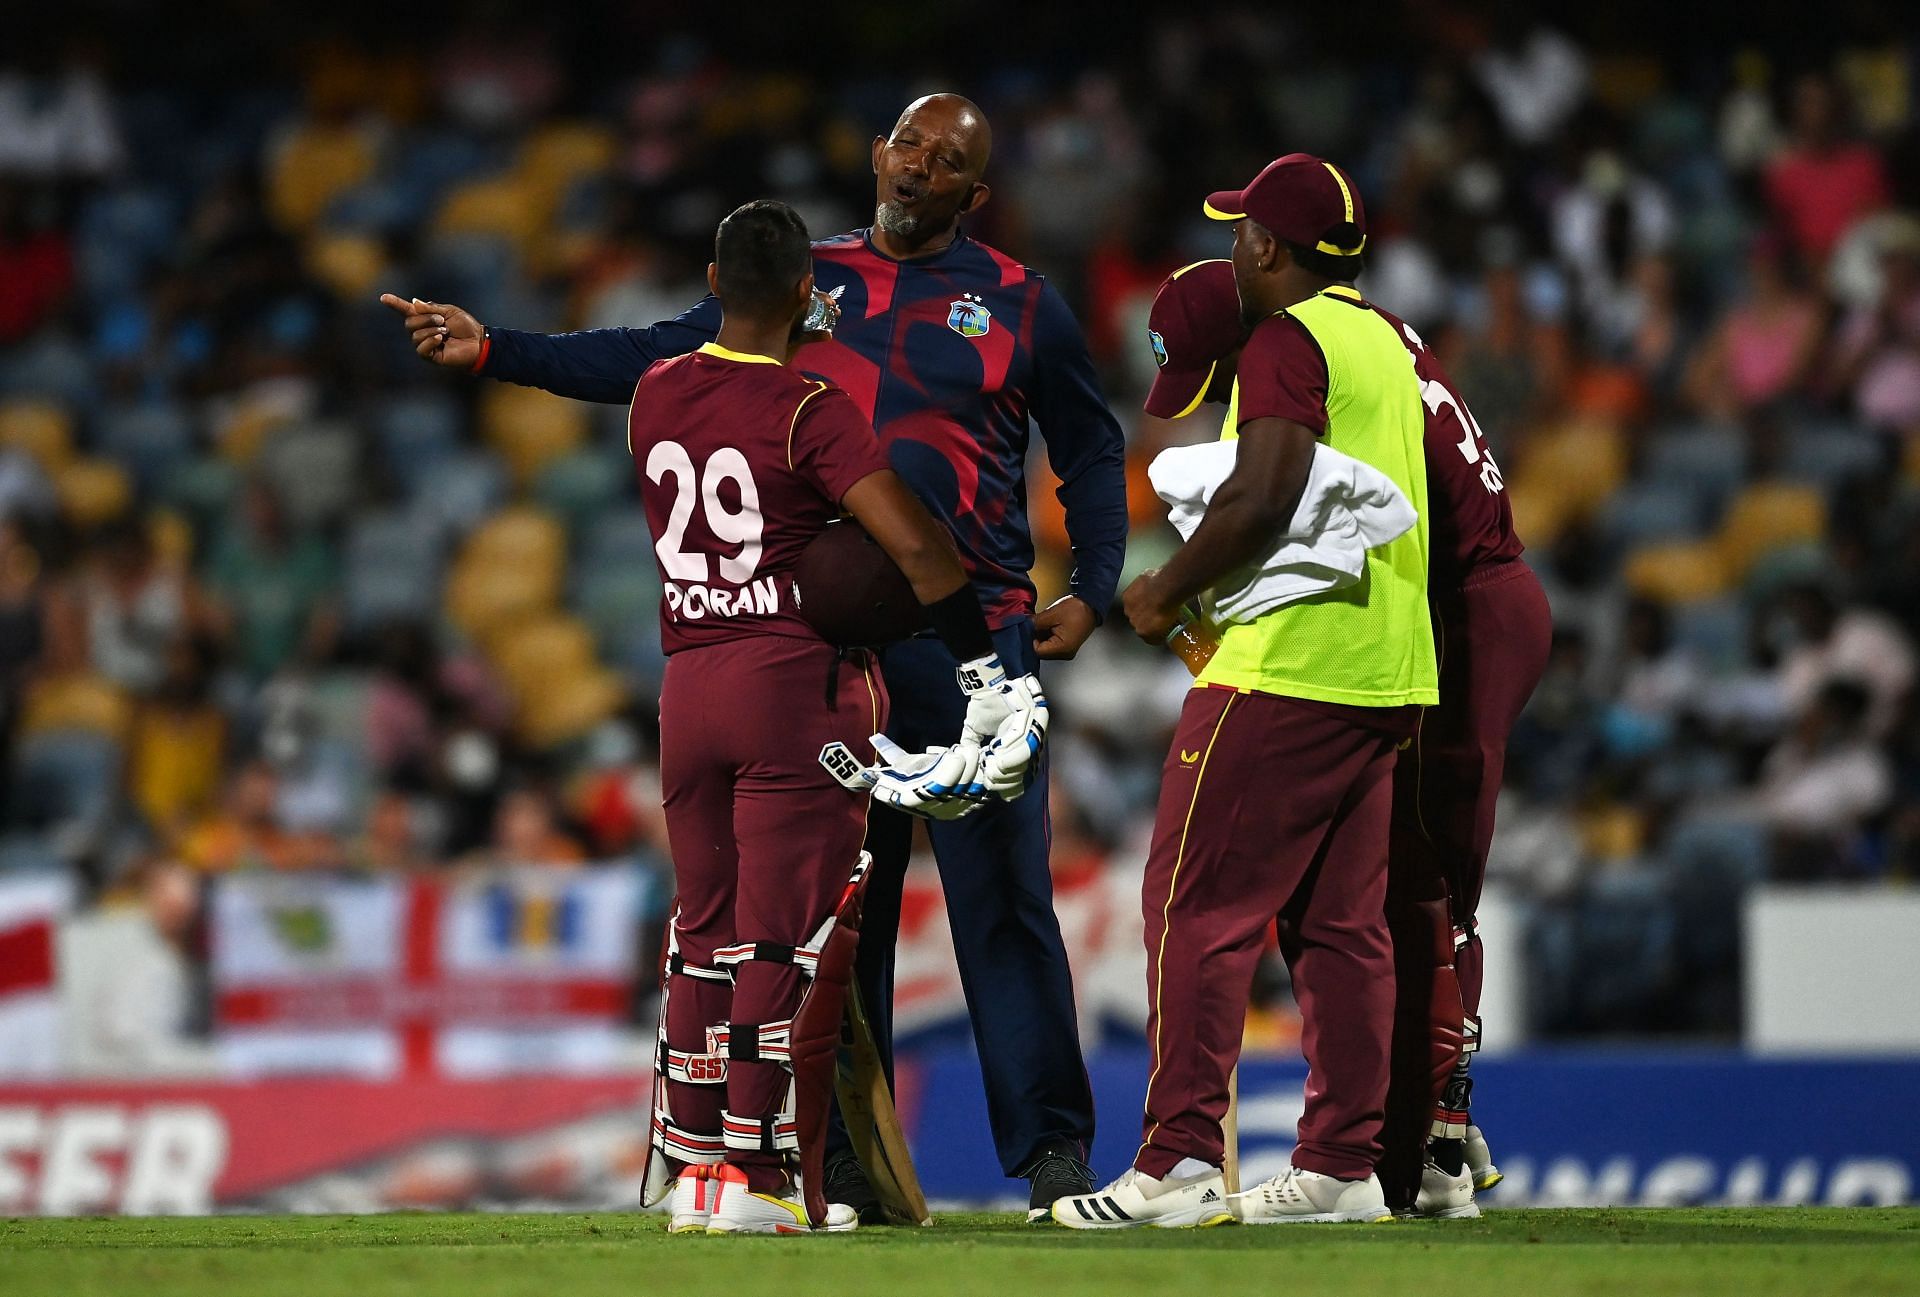 Netherlands vs West Indies, 1st ODI Probable XIs, Match Prediction